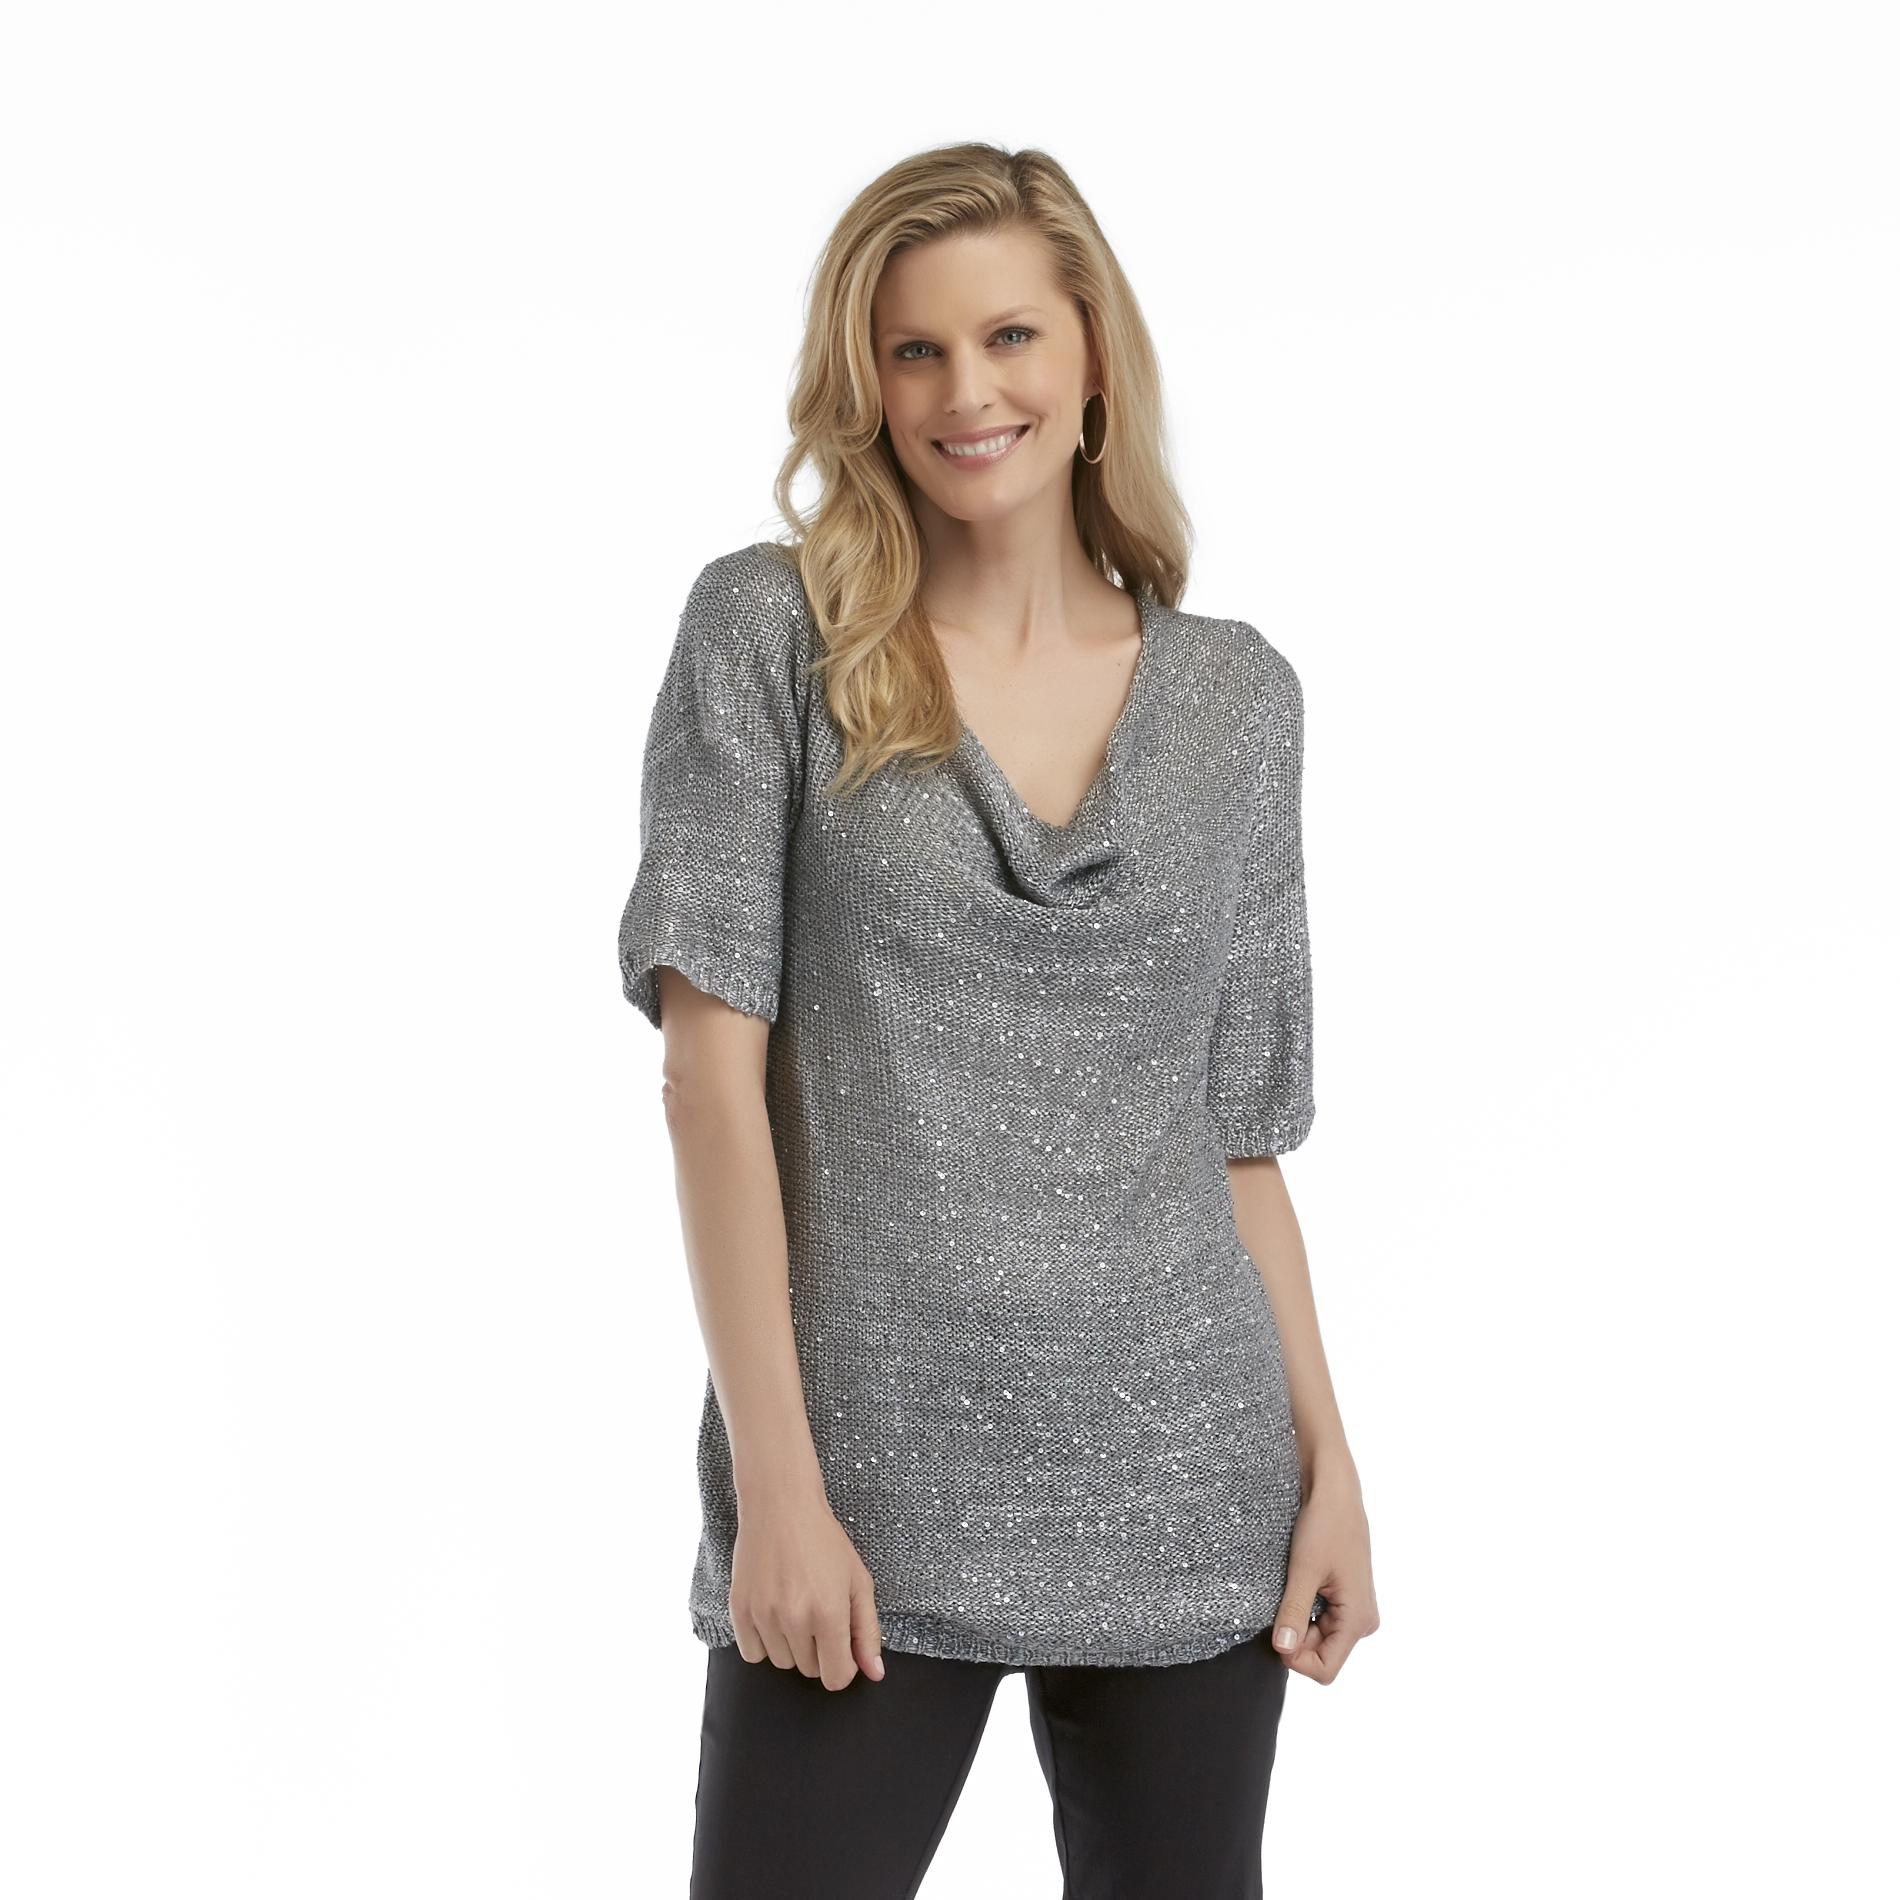 Jaclyn Smith Women's Cowl Neck Sweater - Sequins & Shine